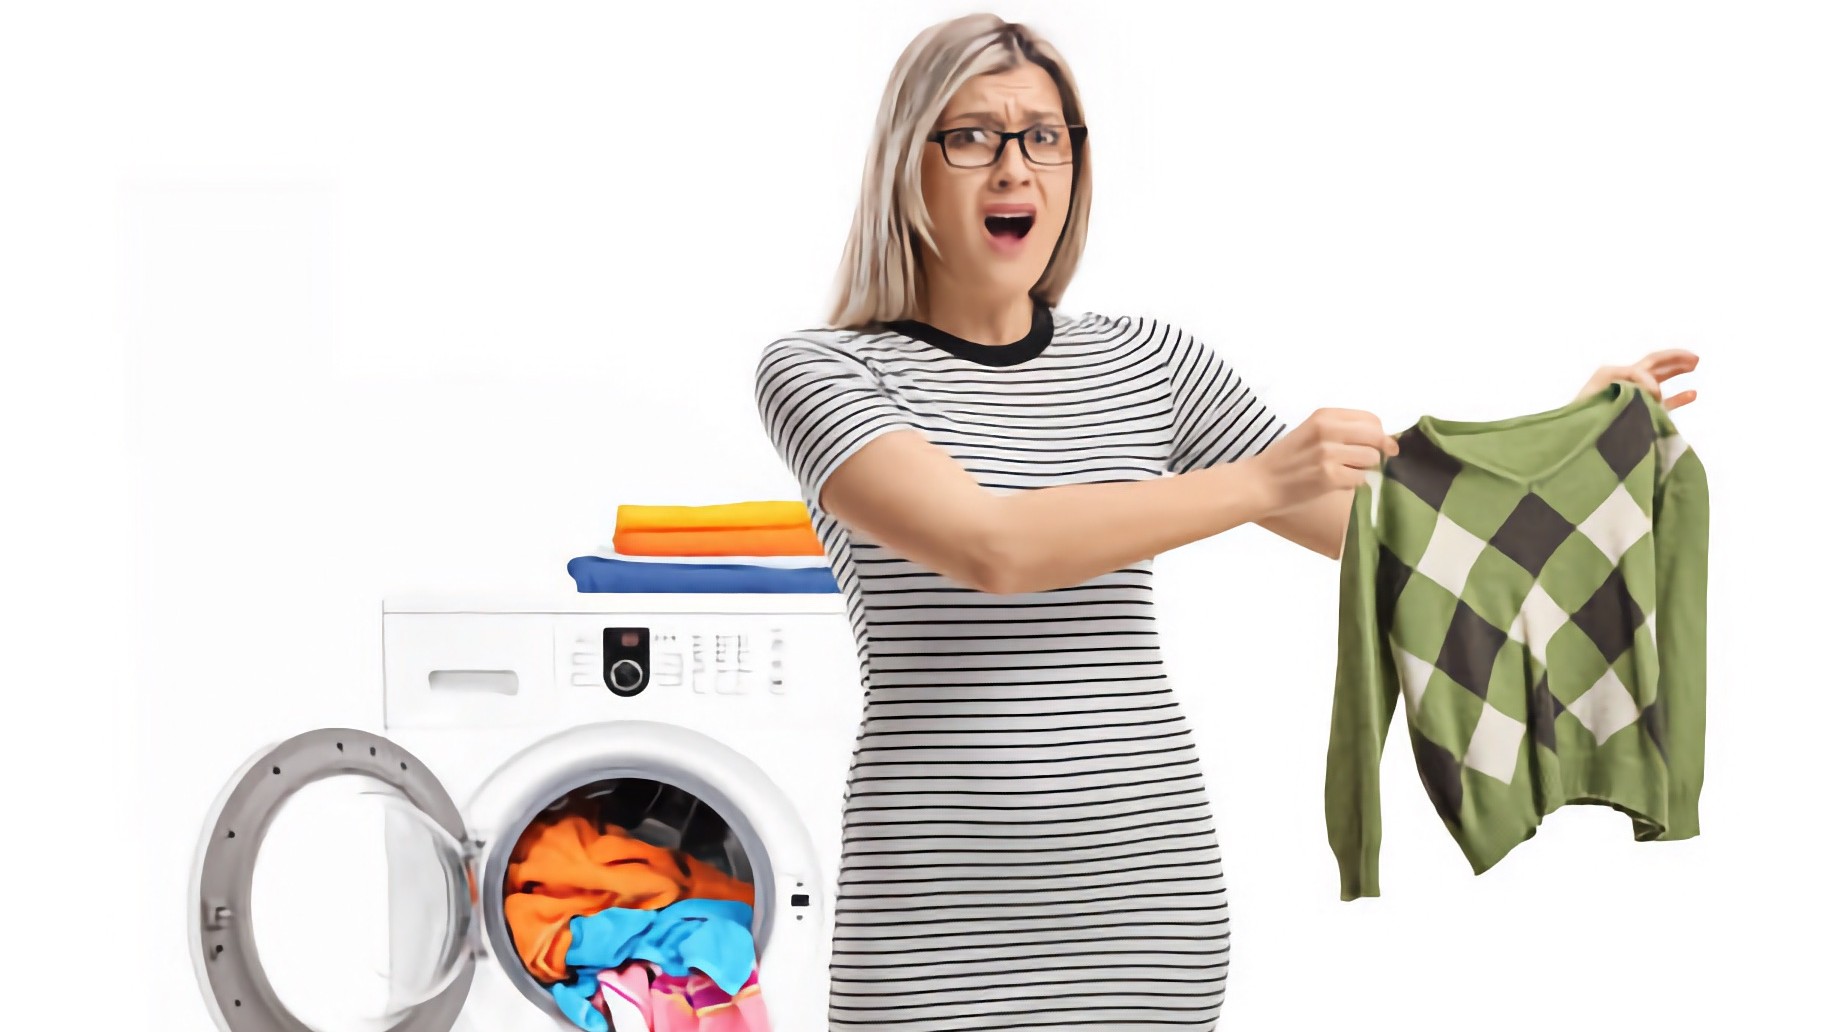 Shrinkage is avoided when air drying clothes